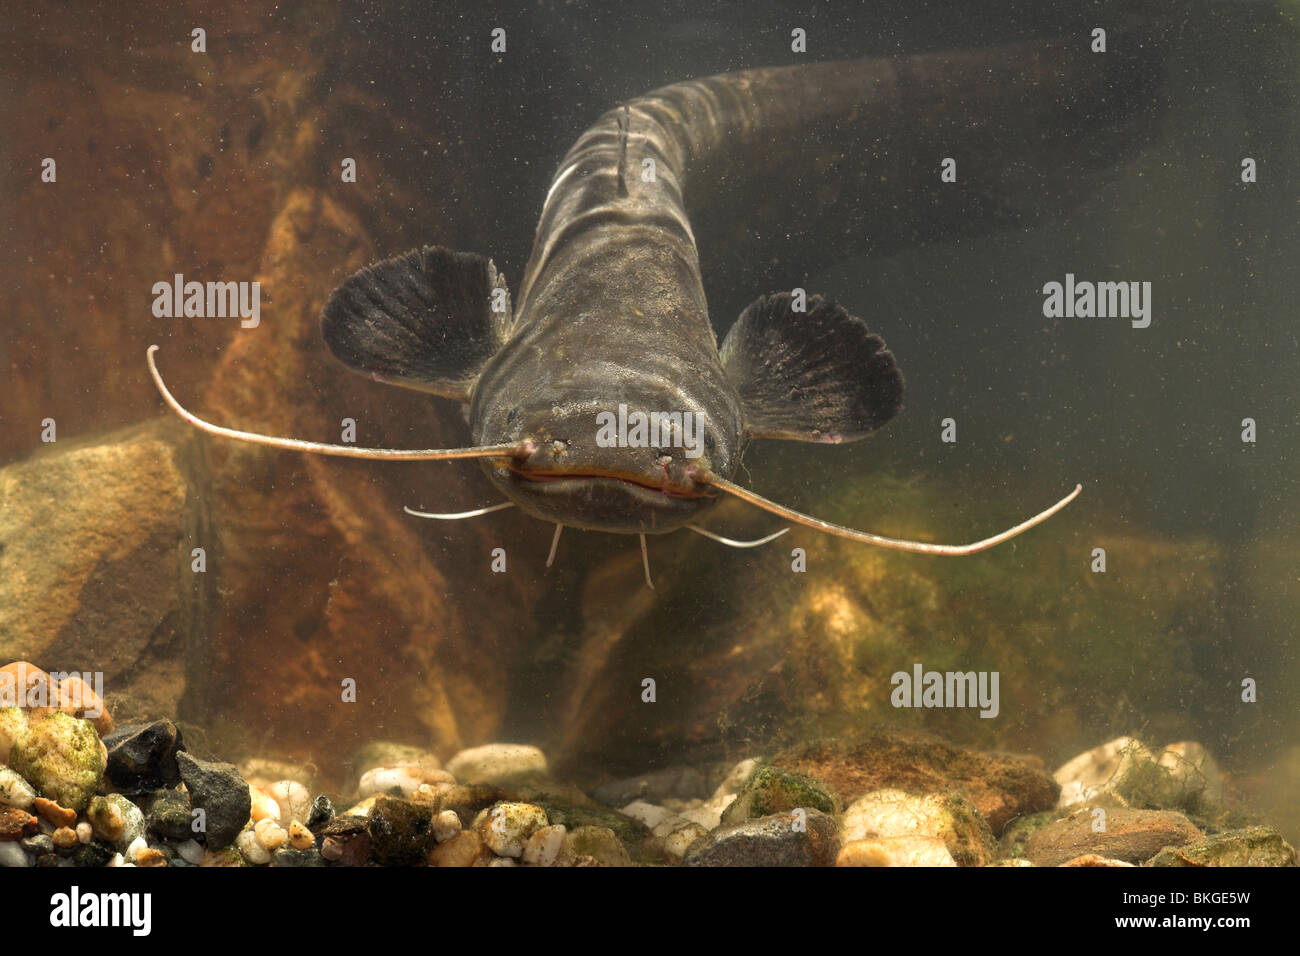 Frontview of a Wels Catfish swimming above the bottom of a river Stock Photo